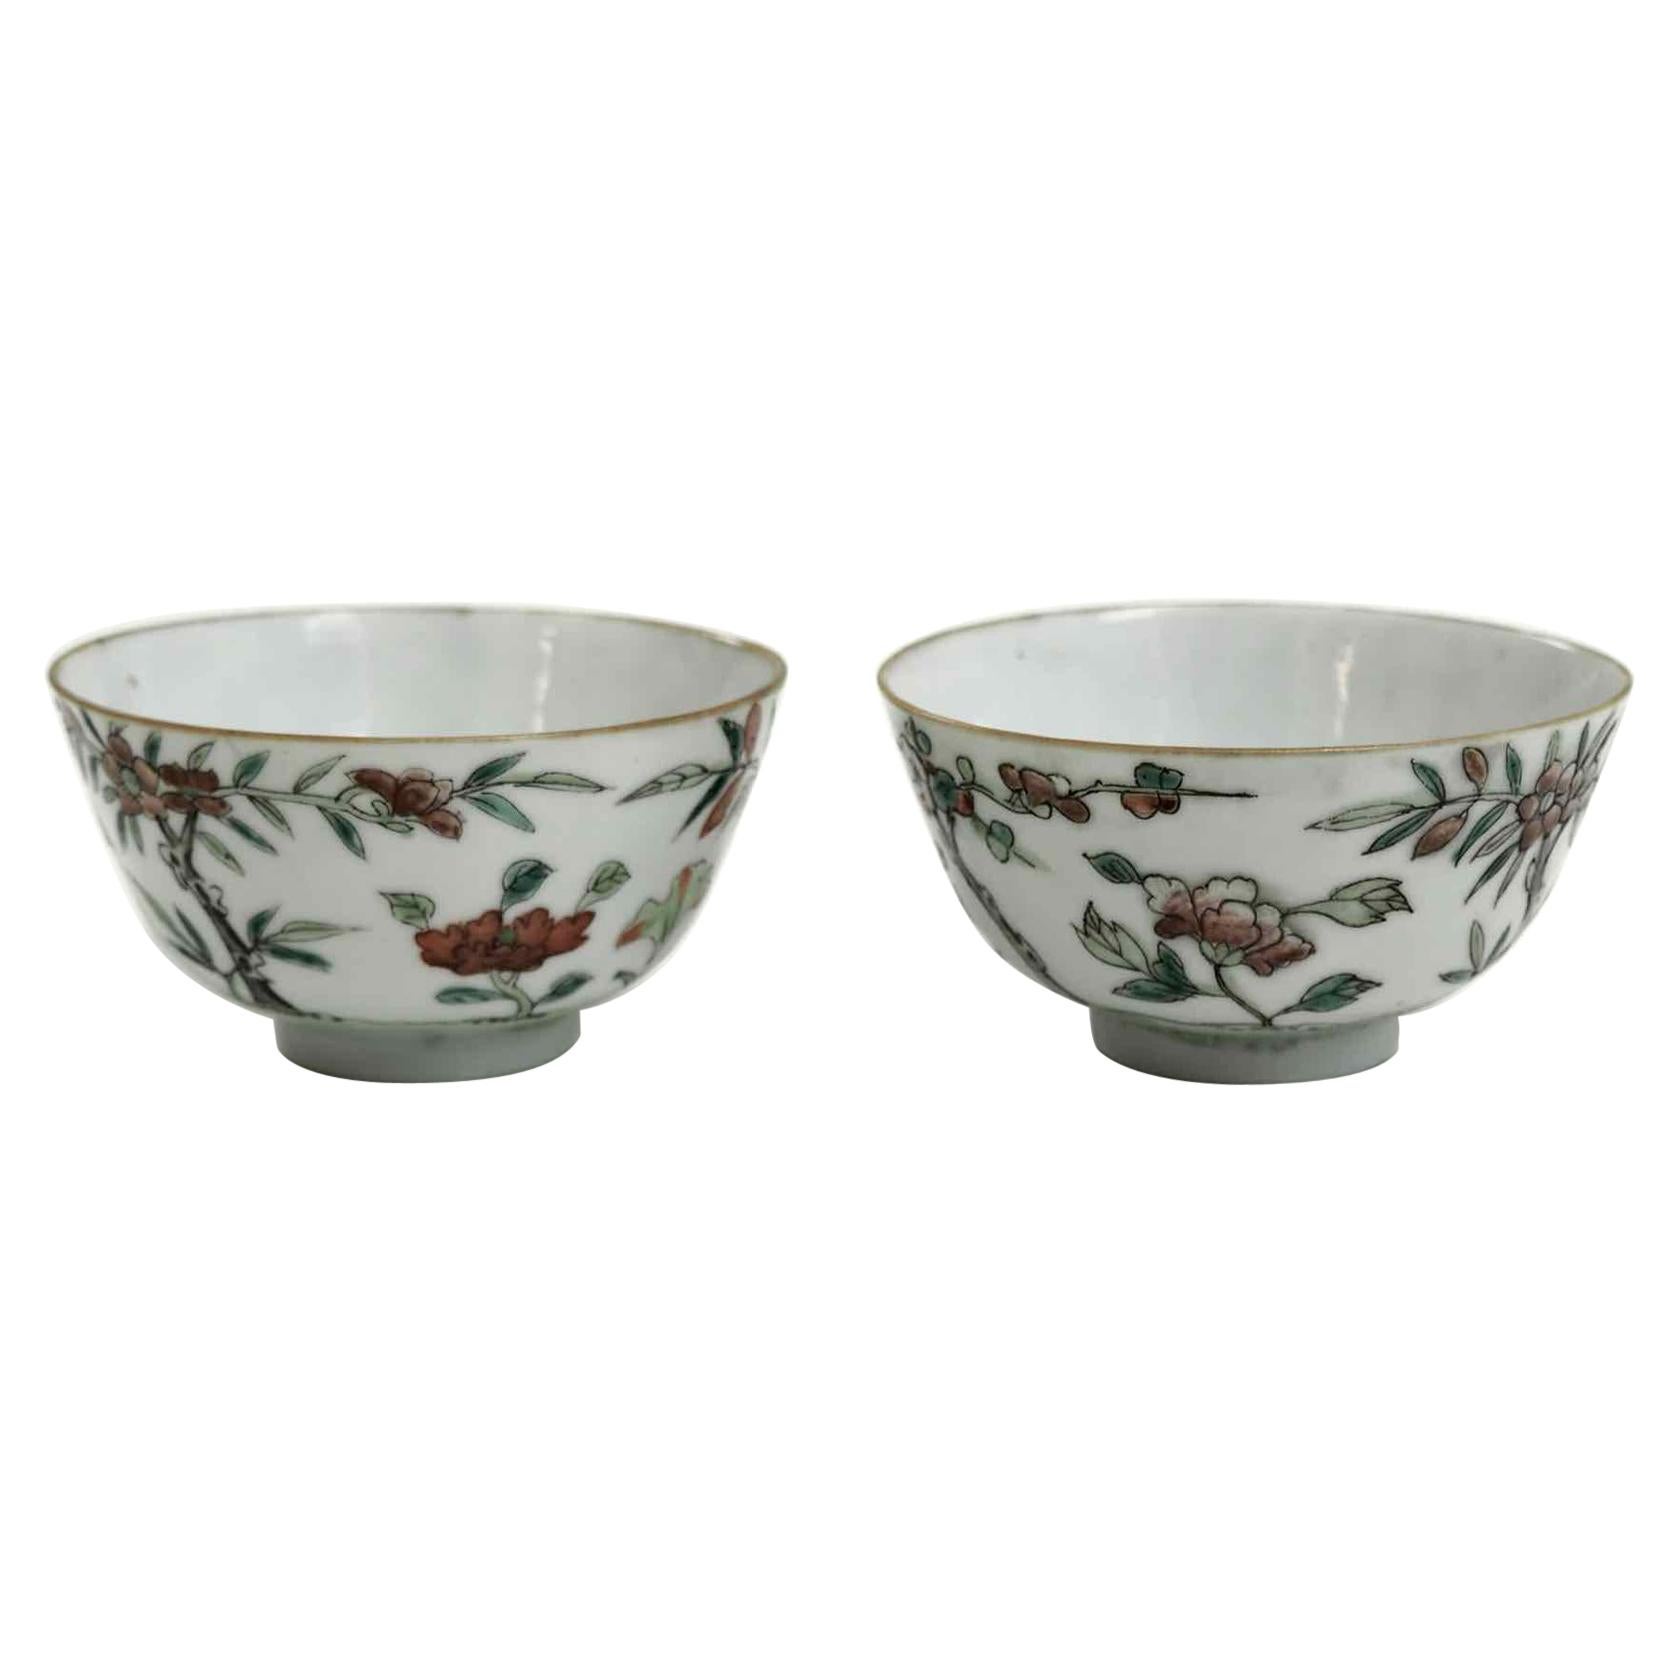 Pair of Chinese Soups Bowls, 18th Century